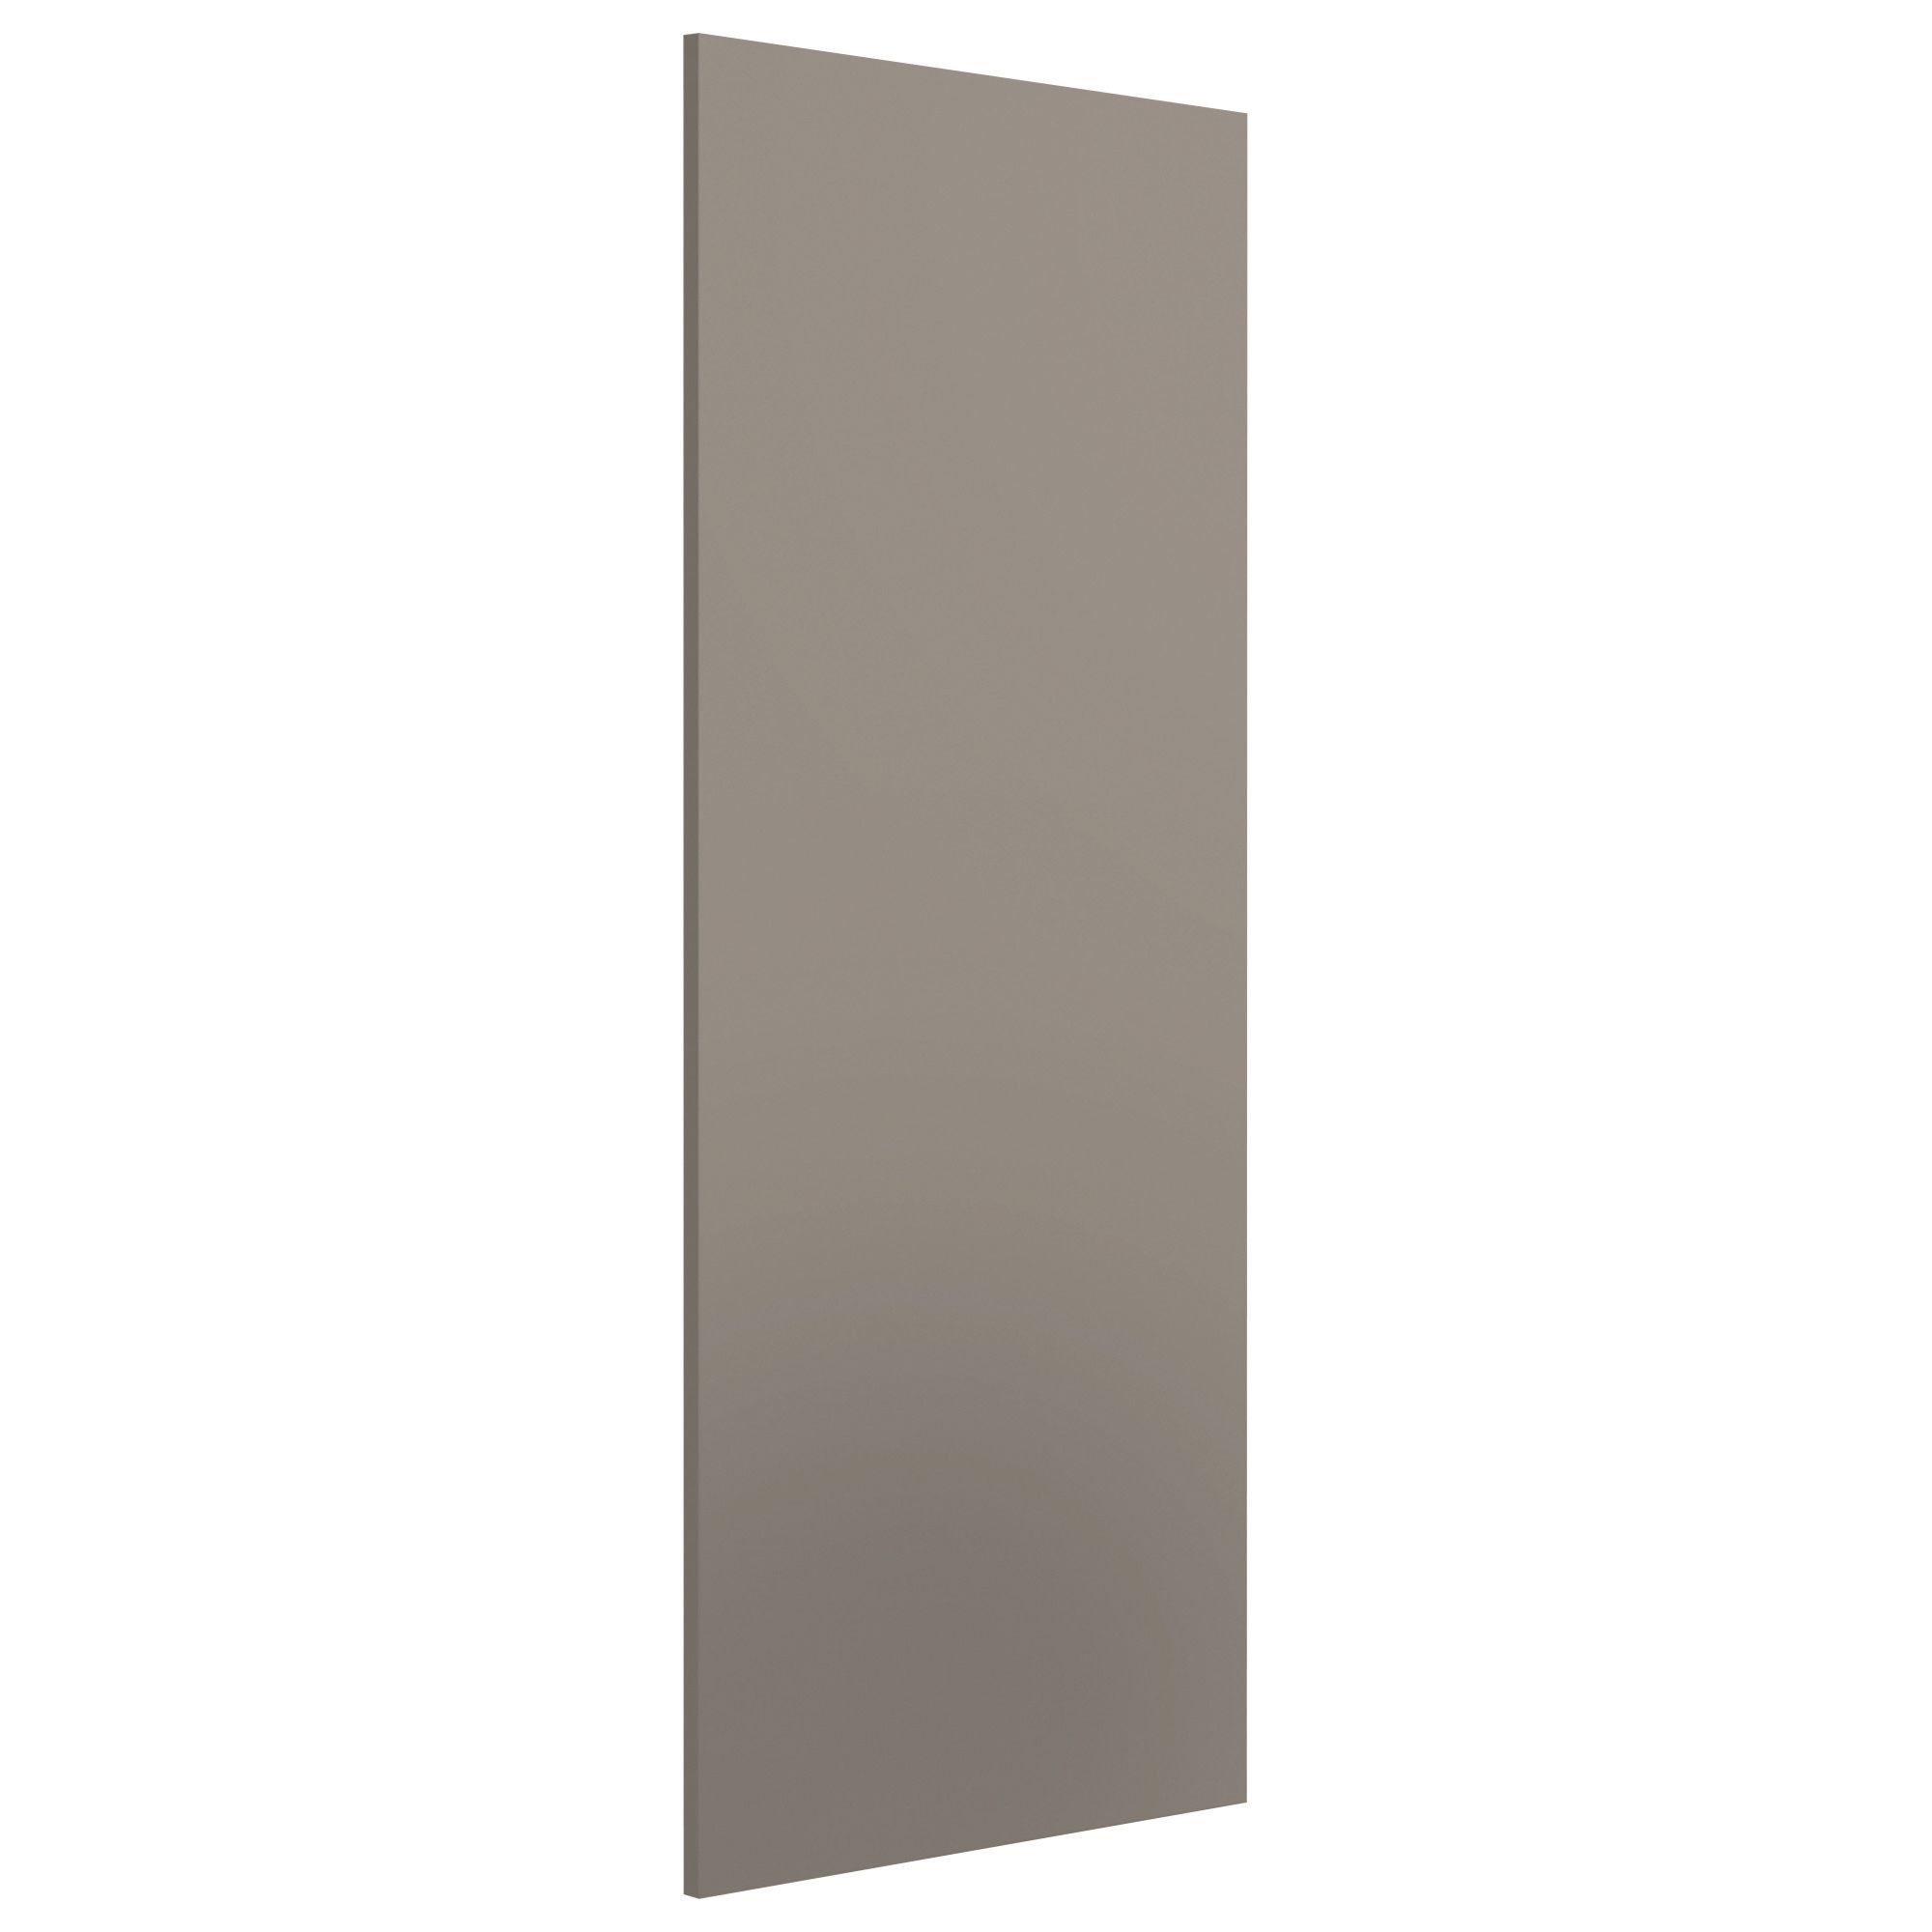 Image of Spacepro Wardrobe End Panel Stone Grey - 2800mm x 620mm x 18mm with Fixing Blocks